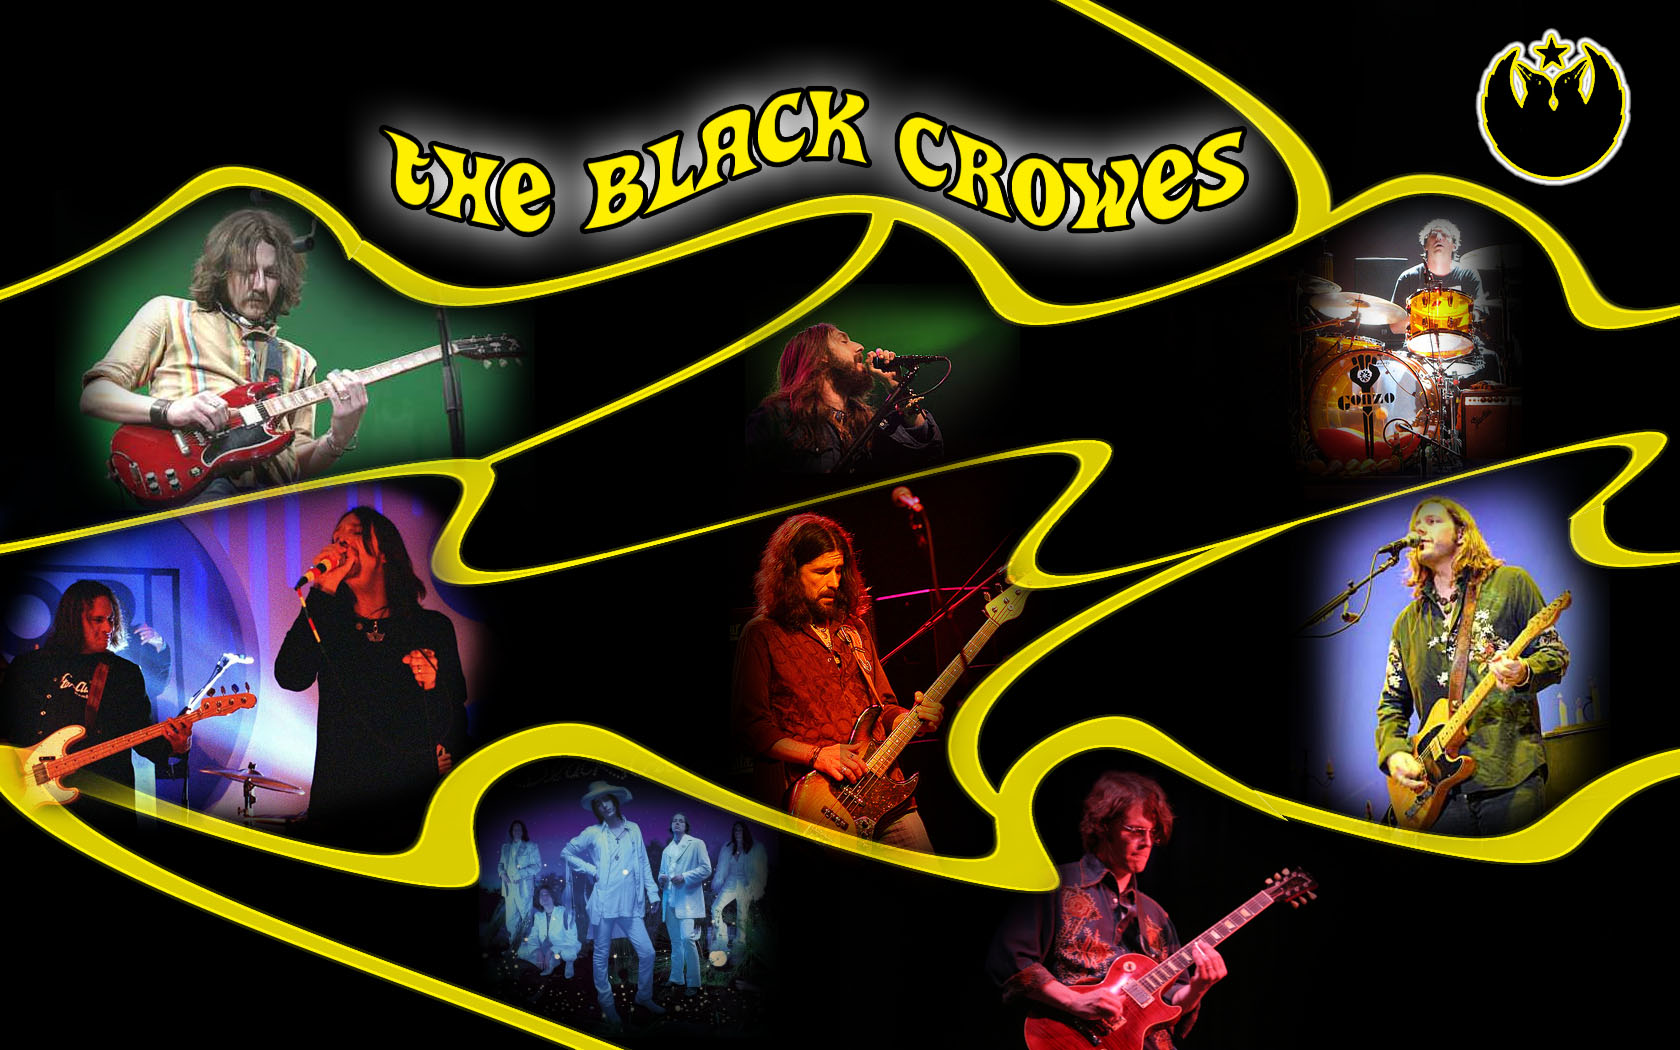 47 Black Crowes Wallpaper On Wallpapersafari Featuring unreleased footage and bts content from the 'shake your money maker' archives. black crowes wallpaper on wallpapersafari